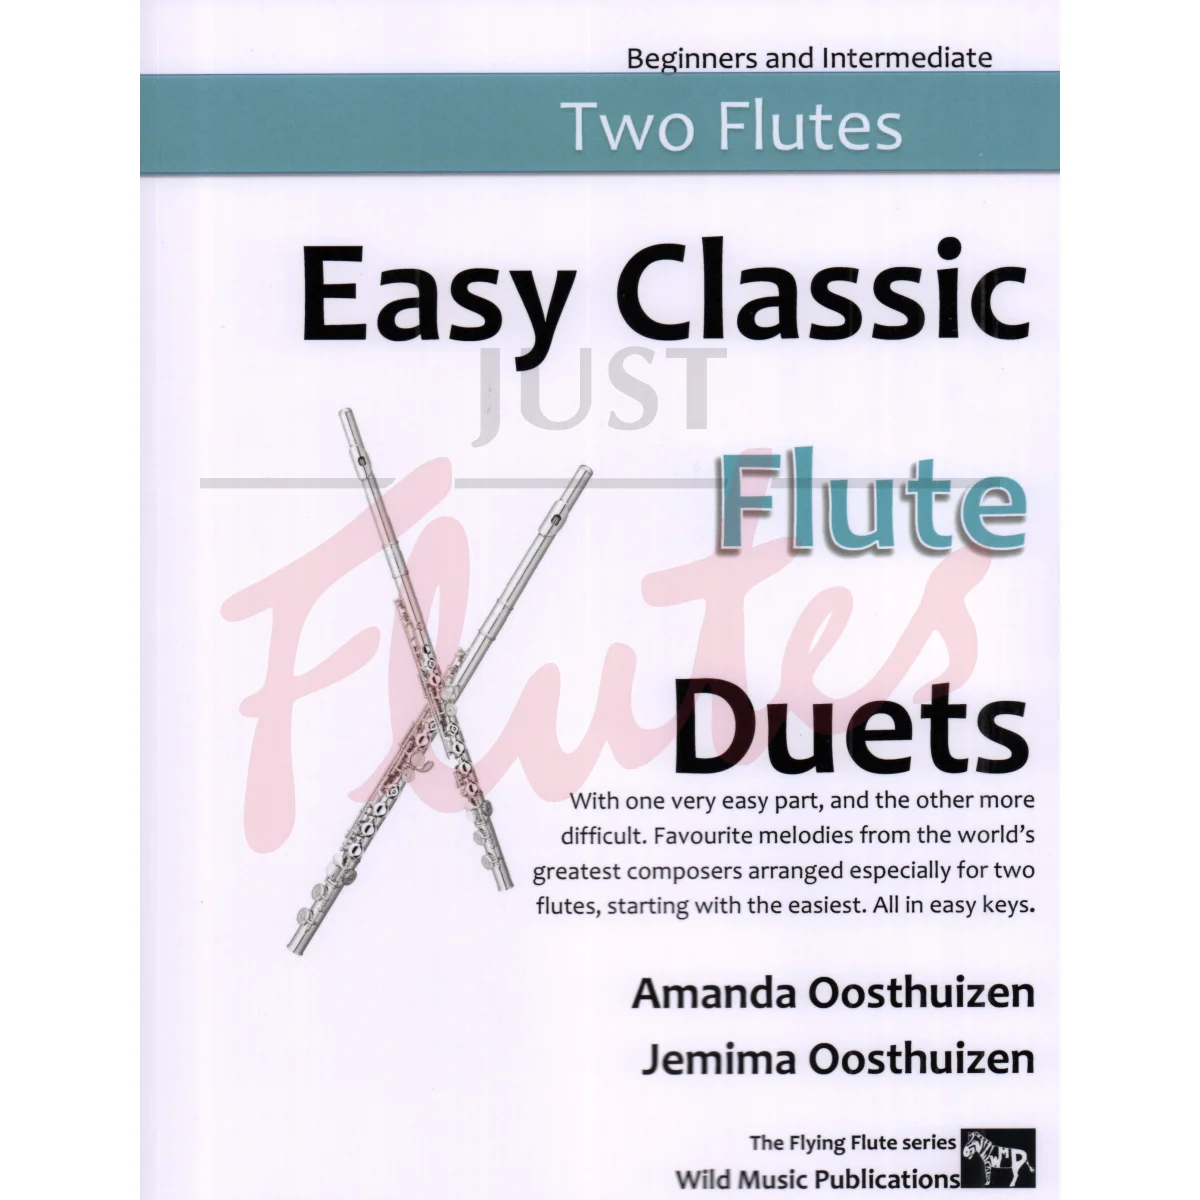 Easy Classic Flute Duets